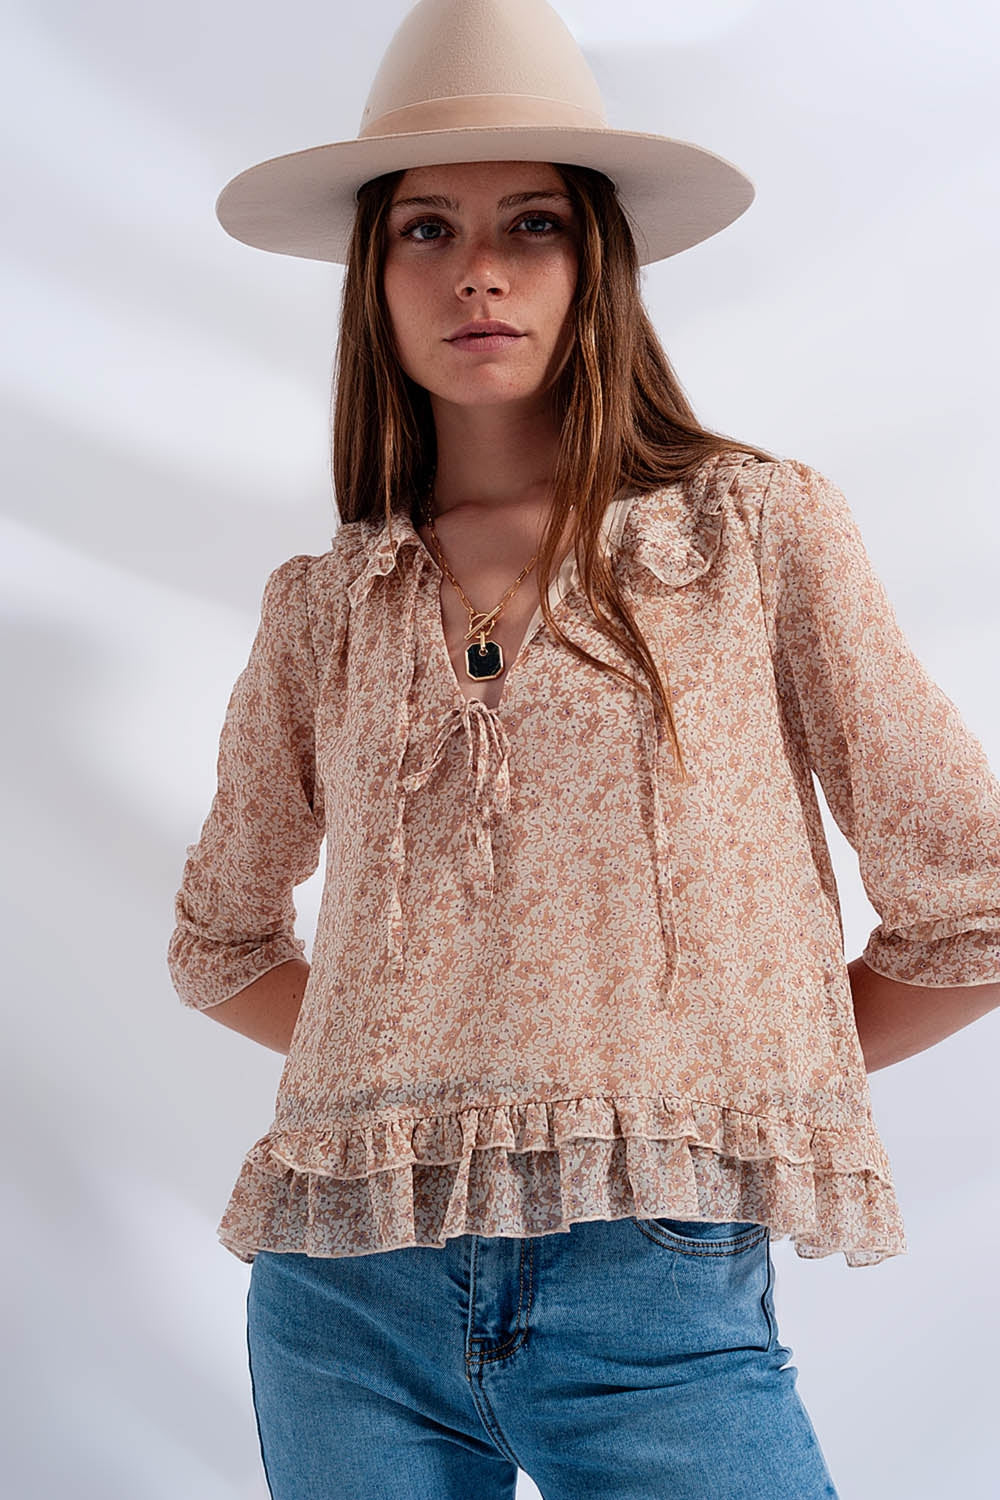 RM Tie Front Chiffon Blouse in Beige Floral Print